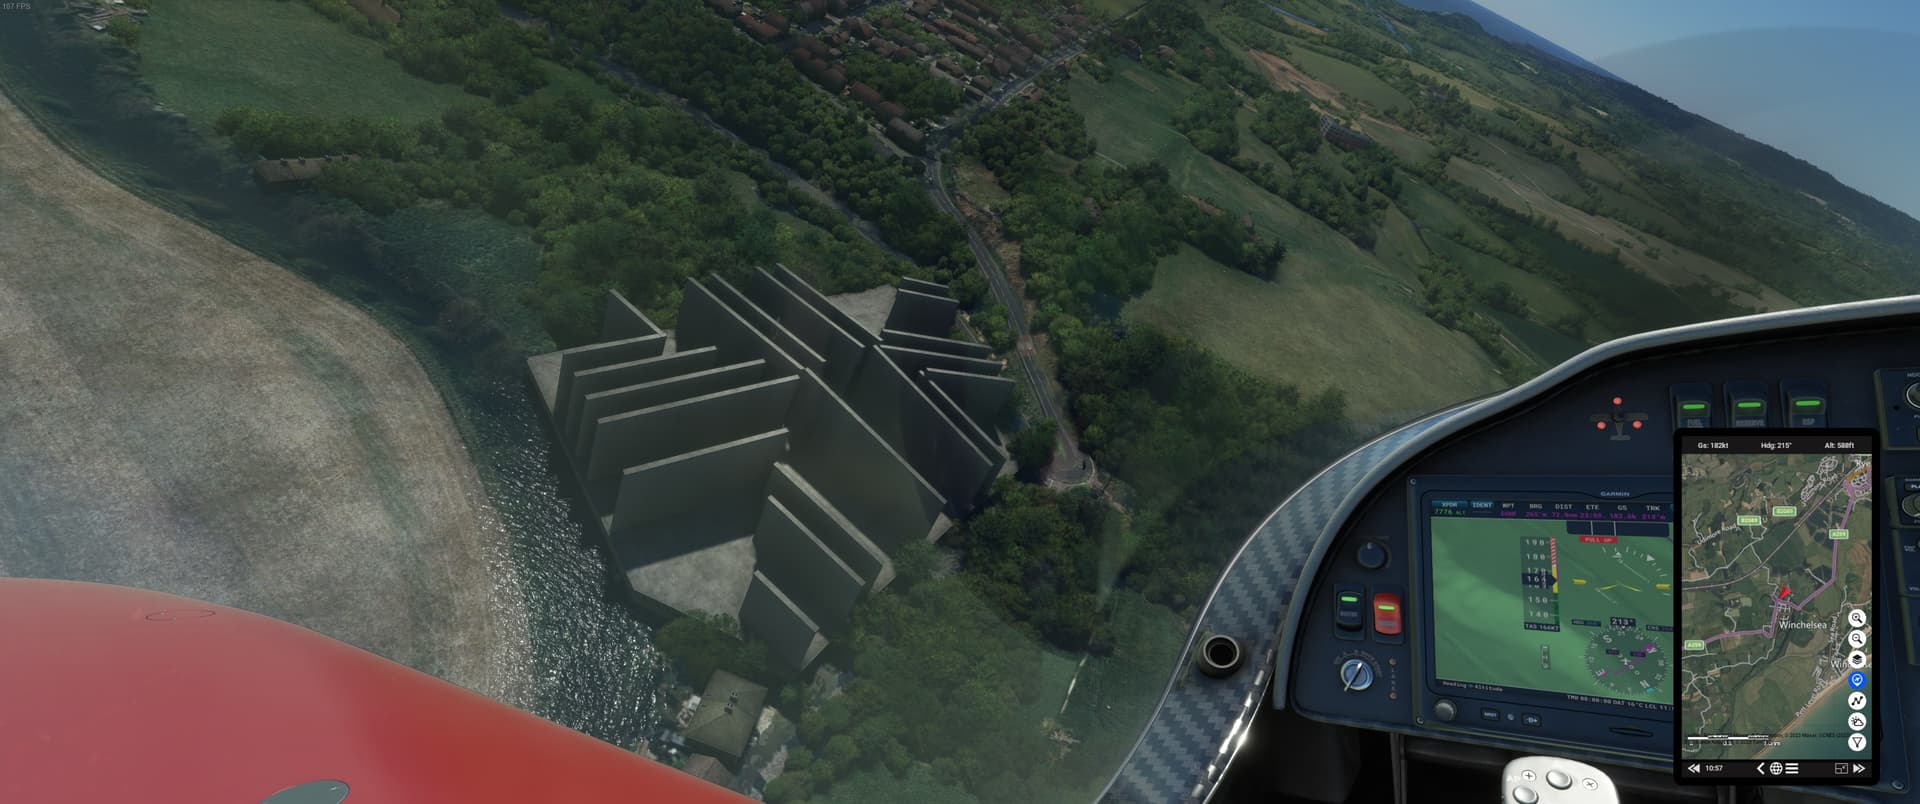 I can see my house from here! Microsoft Flight Simulator has laid